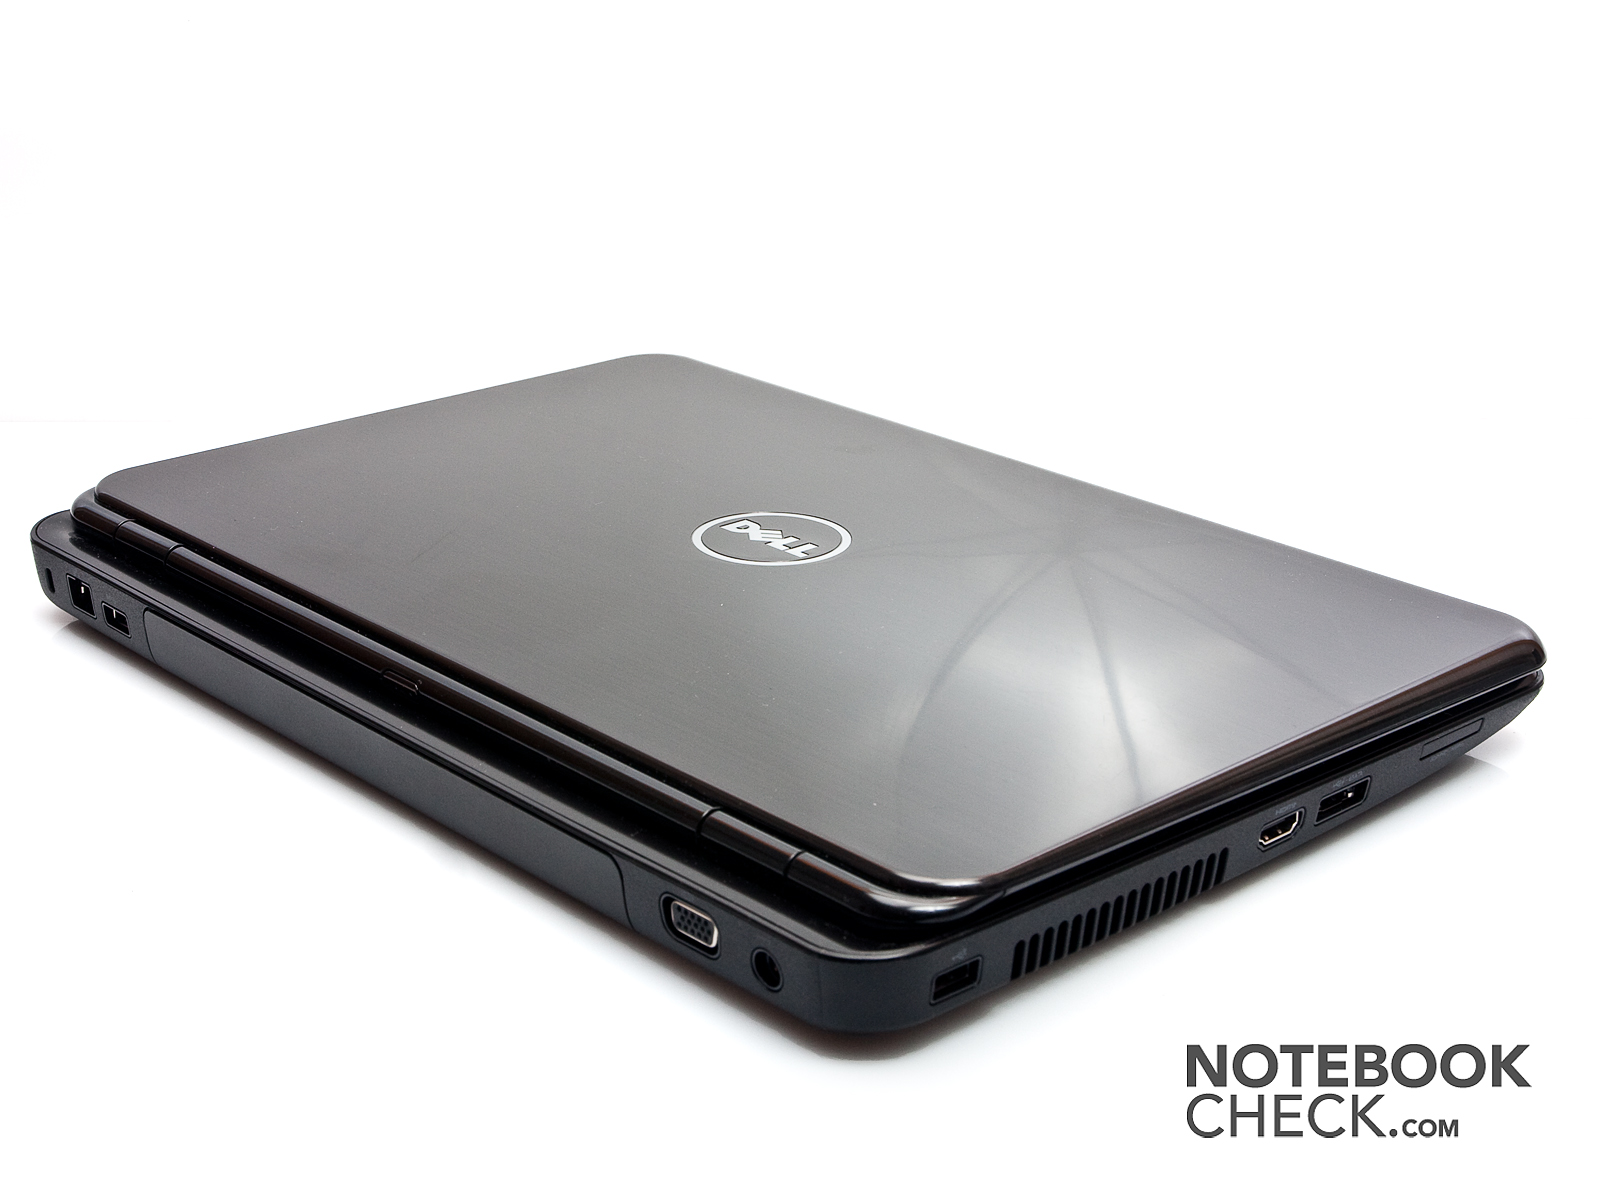 dell inspiron n5110 webcam drivers for windows 7 64 bit